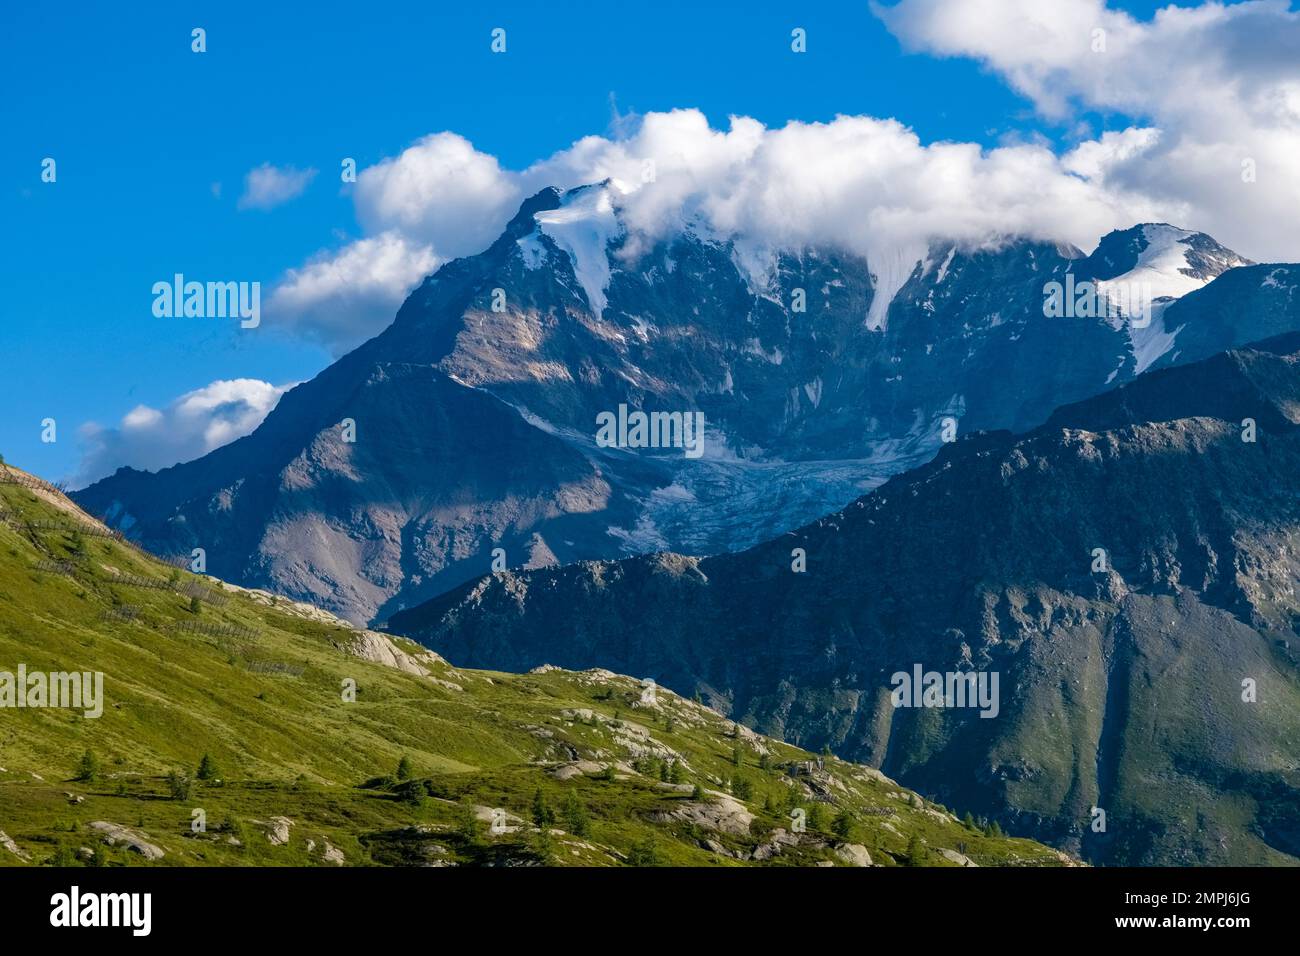 The summits of the mountains Fletschhorn, Senggchuppa and Schilthorn, partly covered in clouds, rising over Simplon Pass. Stock Photo